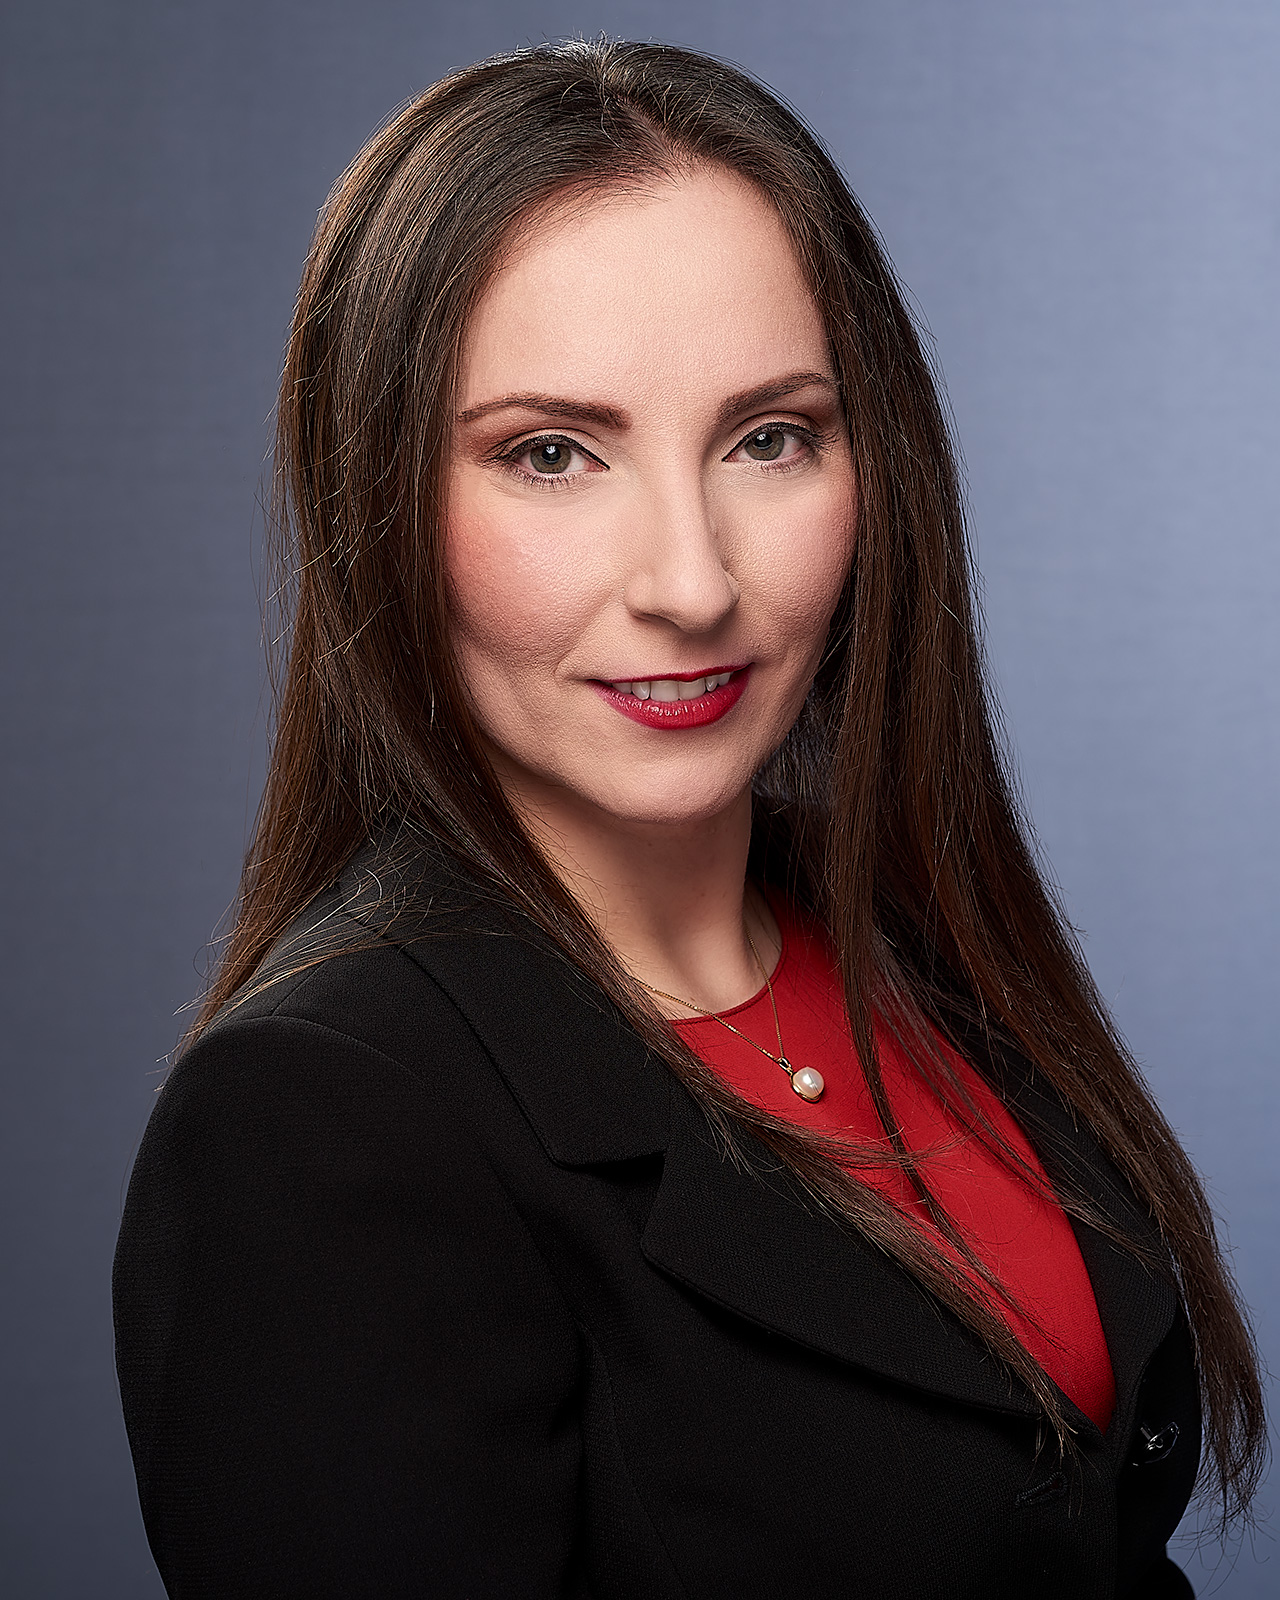 A woman lawyer in an executive headshot in Los Angeles made by The Light Committee